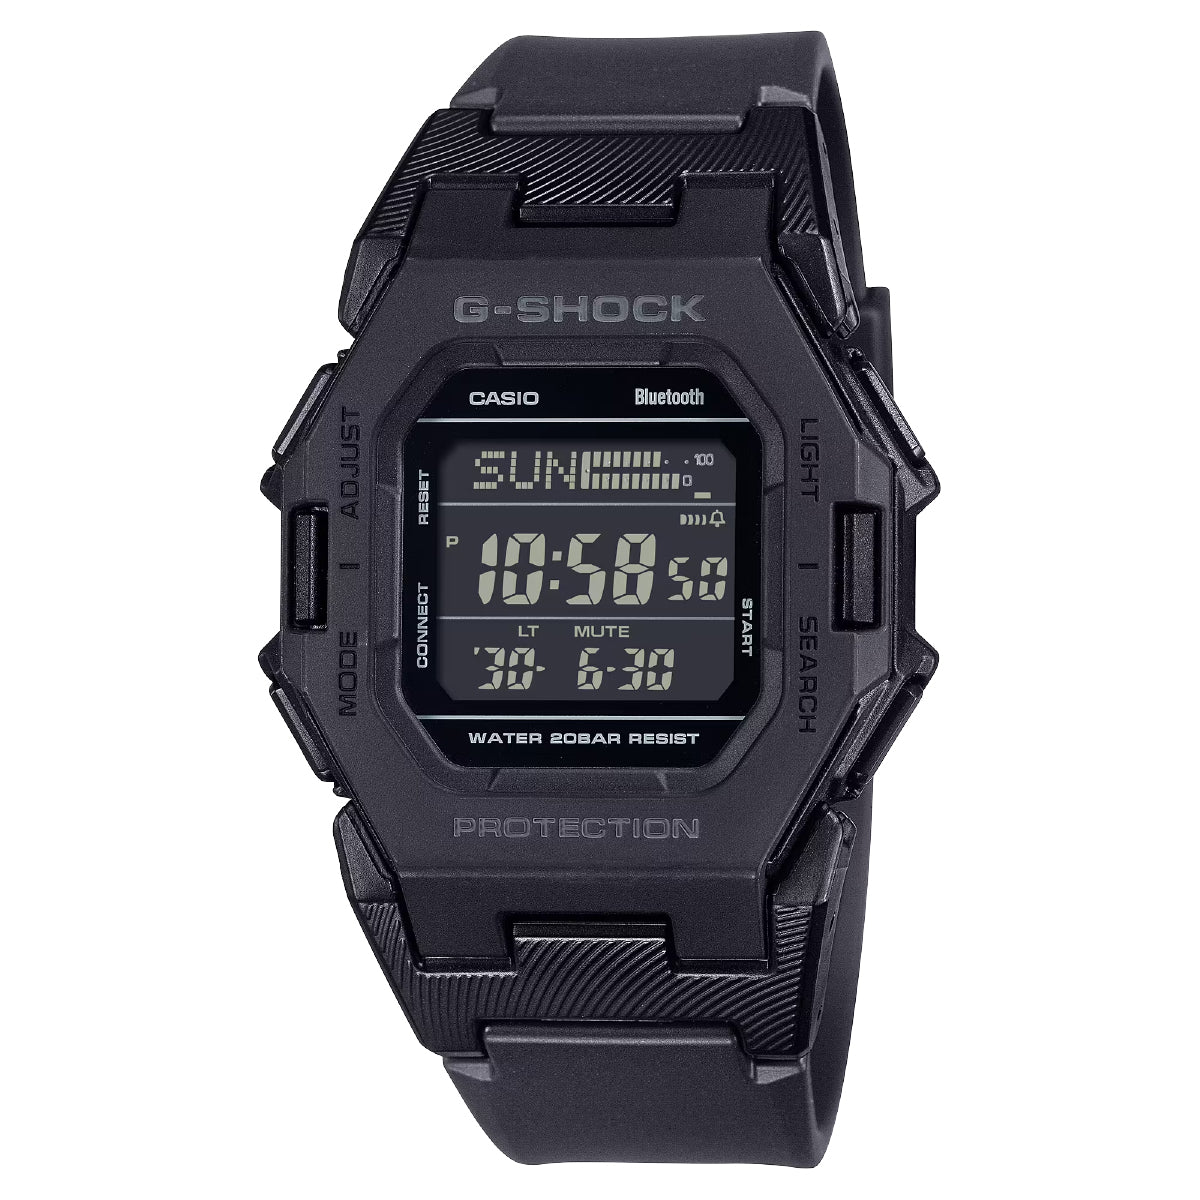 GD-B500-1JF – Kinetics｜OFFICIAL ONLINE STORE